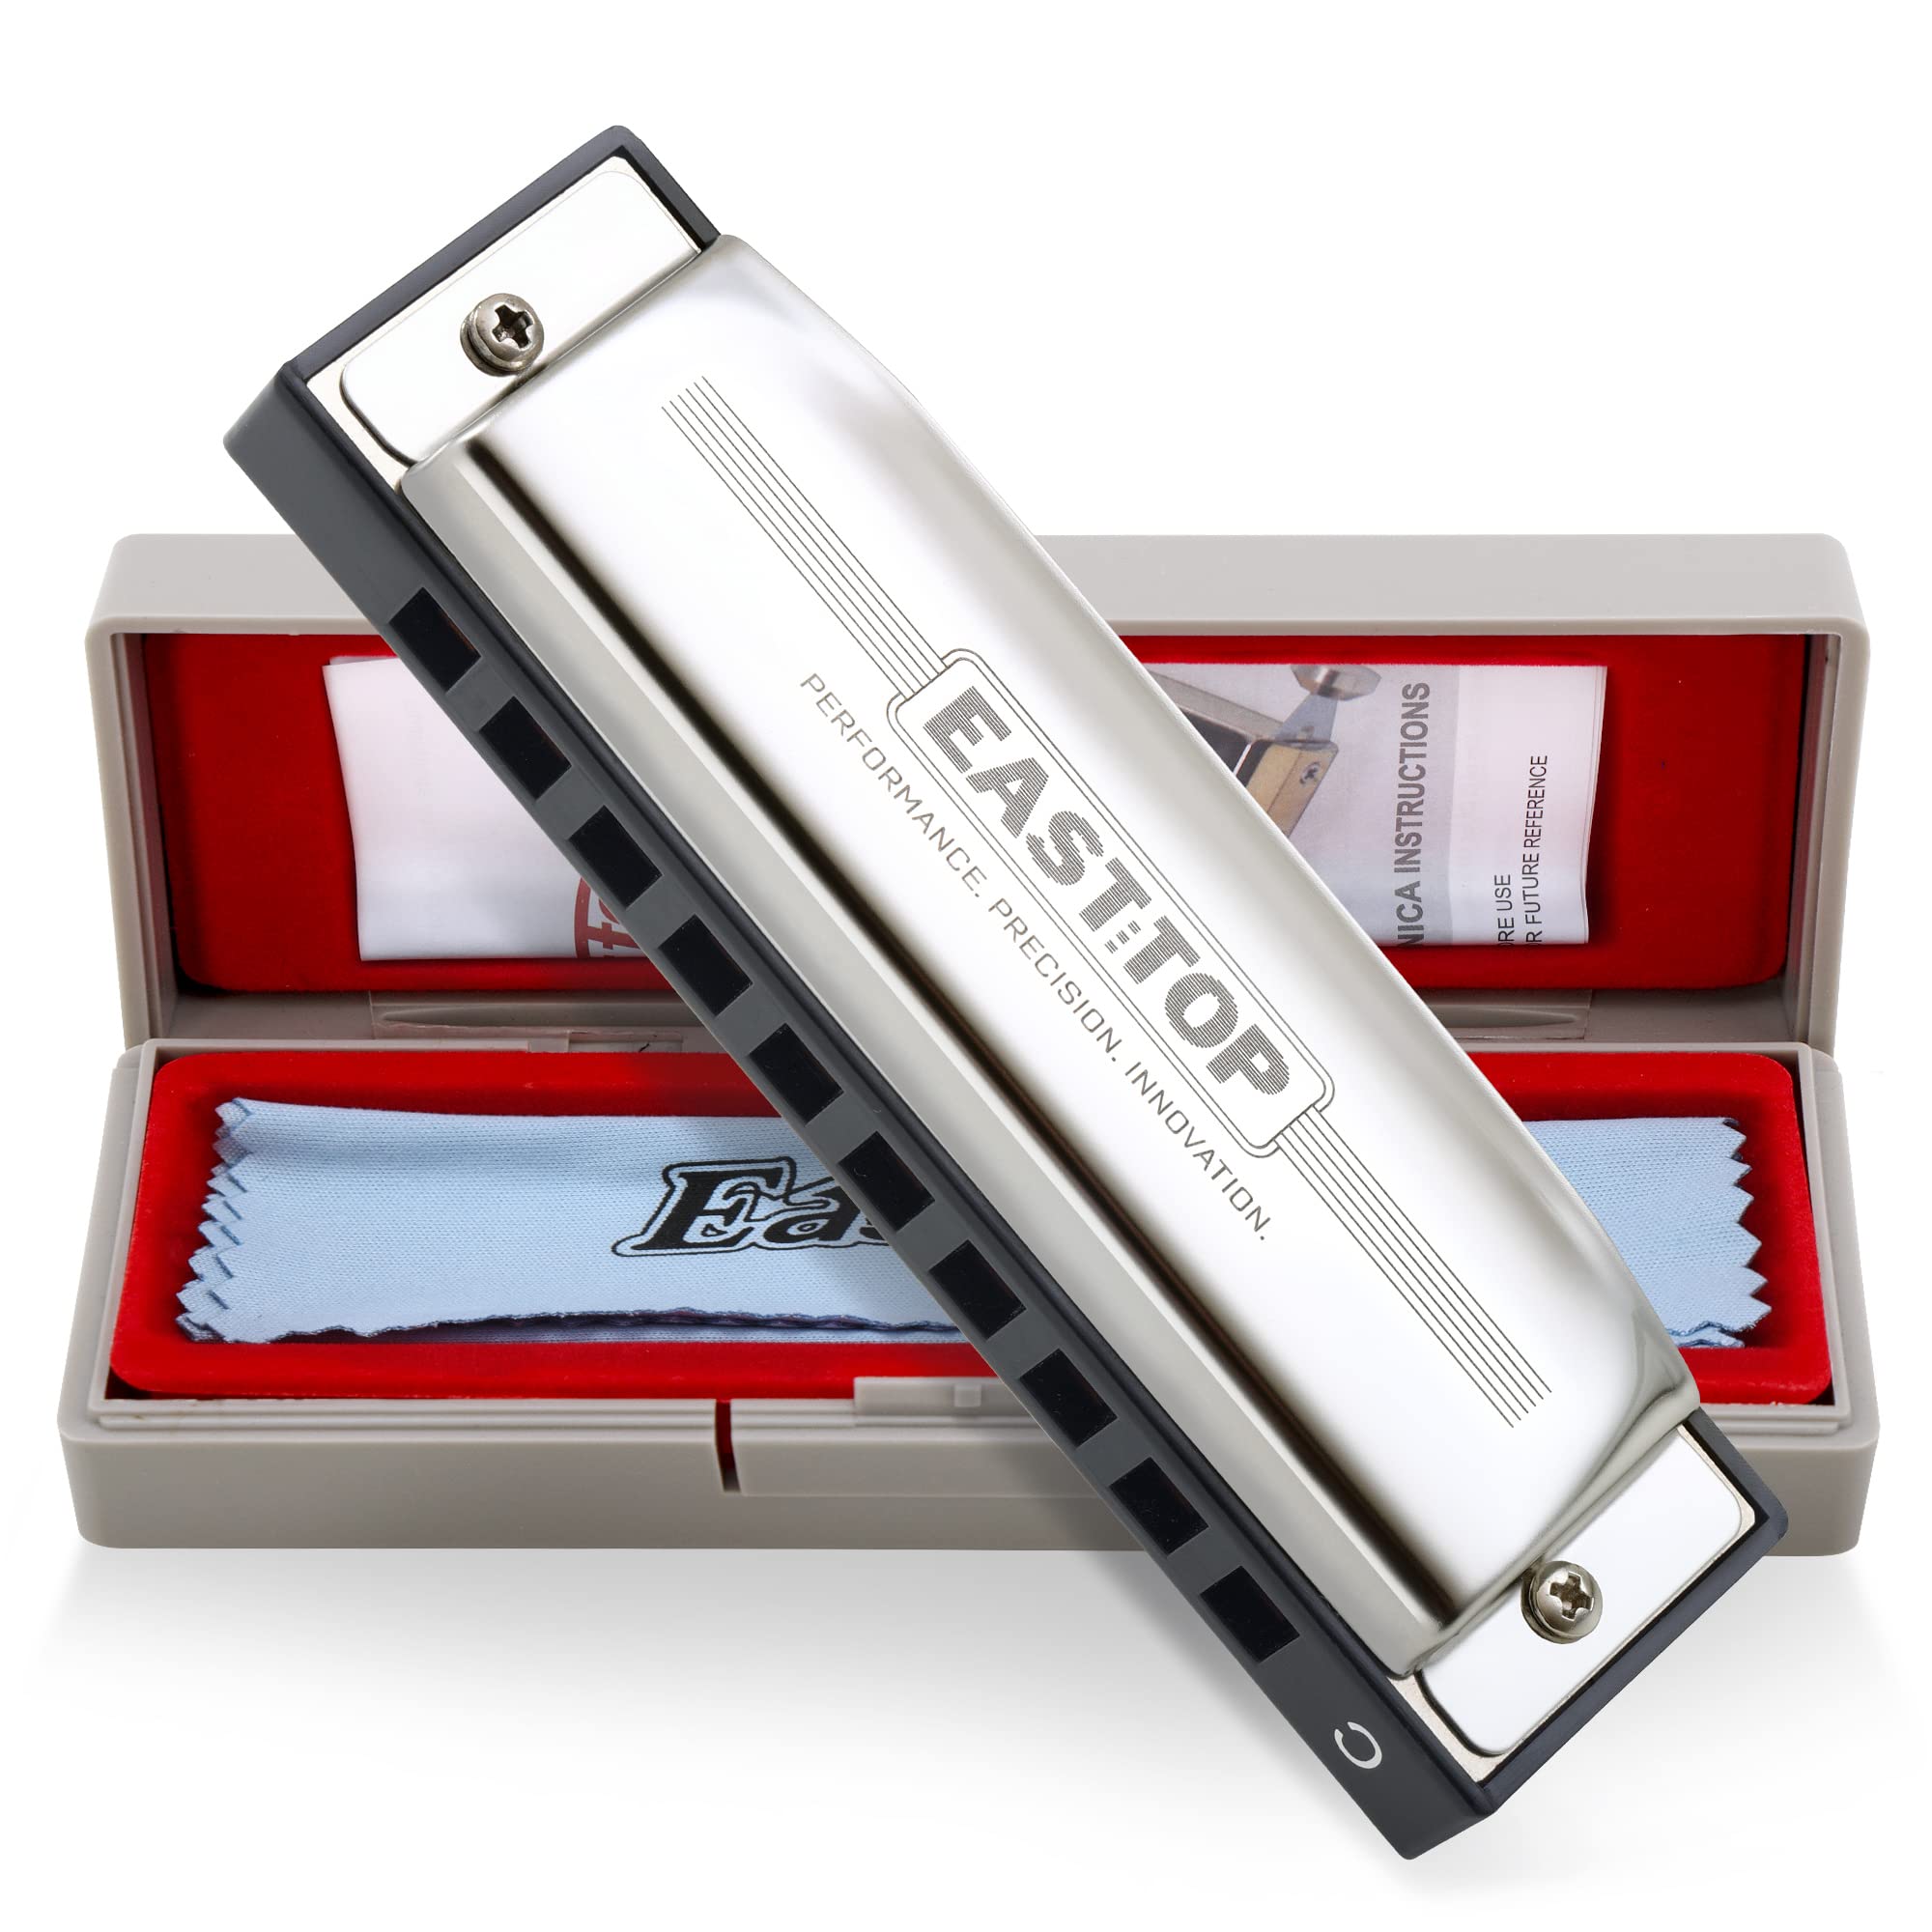 East top Harmonica C, Upgraded Blues Harmonica Key of C, Blues Harp Mouth Organ 10 Holes 20 Tones T009 Shonrry Diatonic Harmonica for Adult, Students, Beginners and All Skill Levels‘ Players(T009-1) - Easttop harmonica